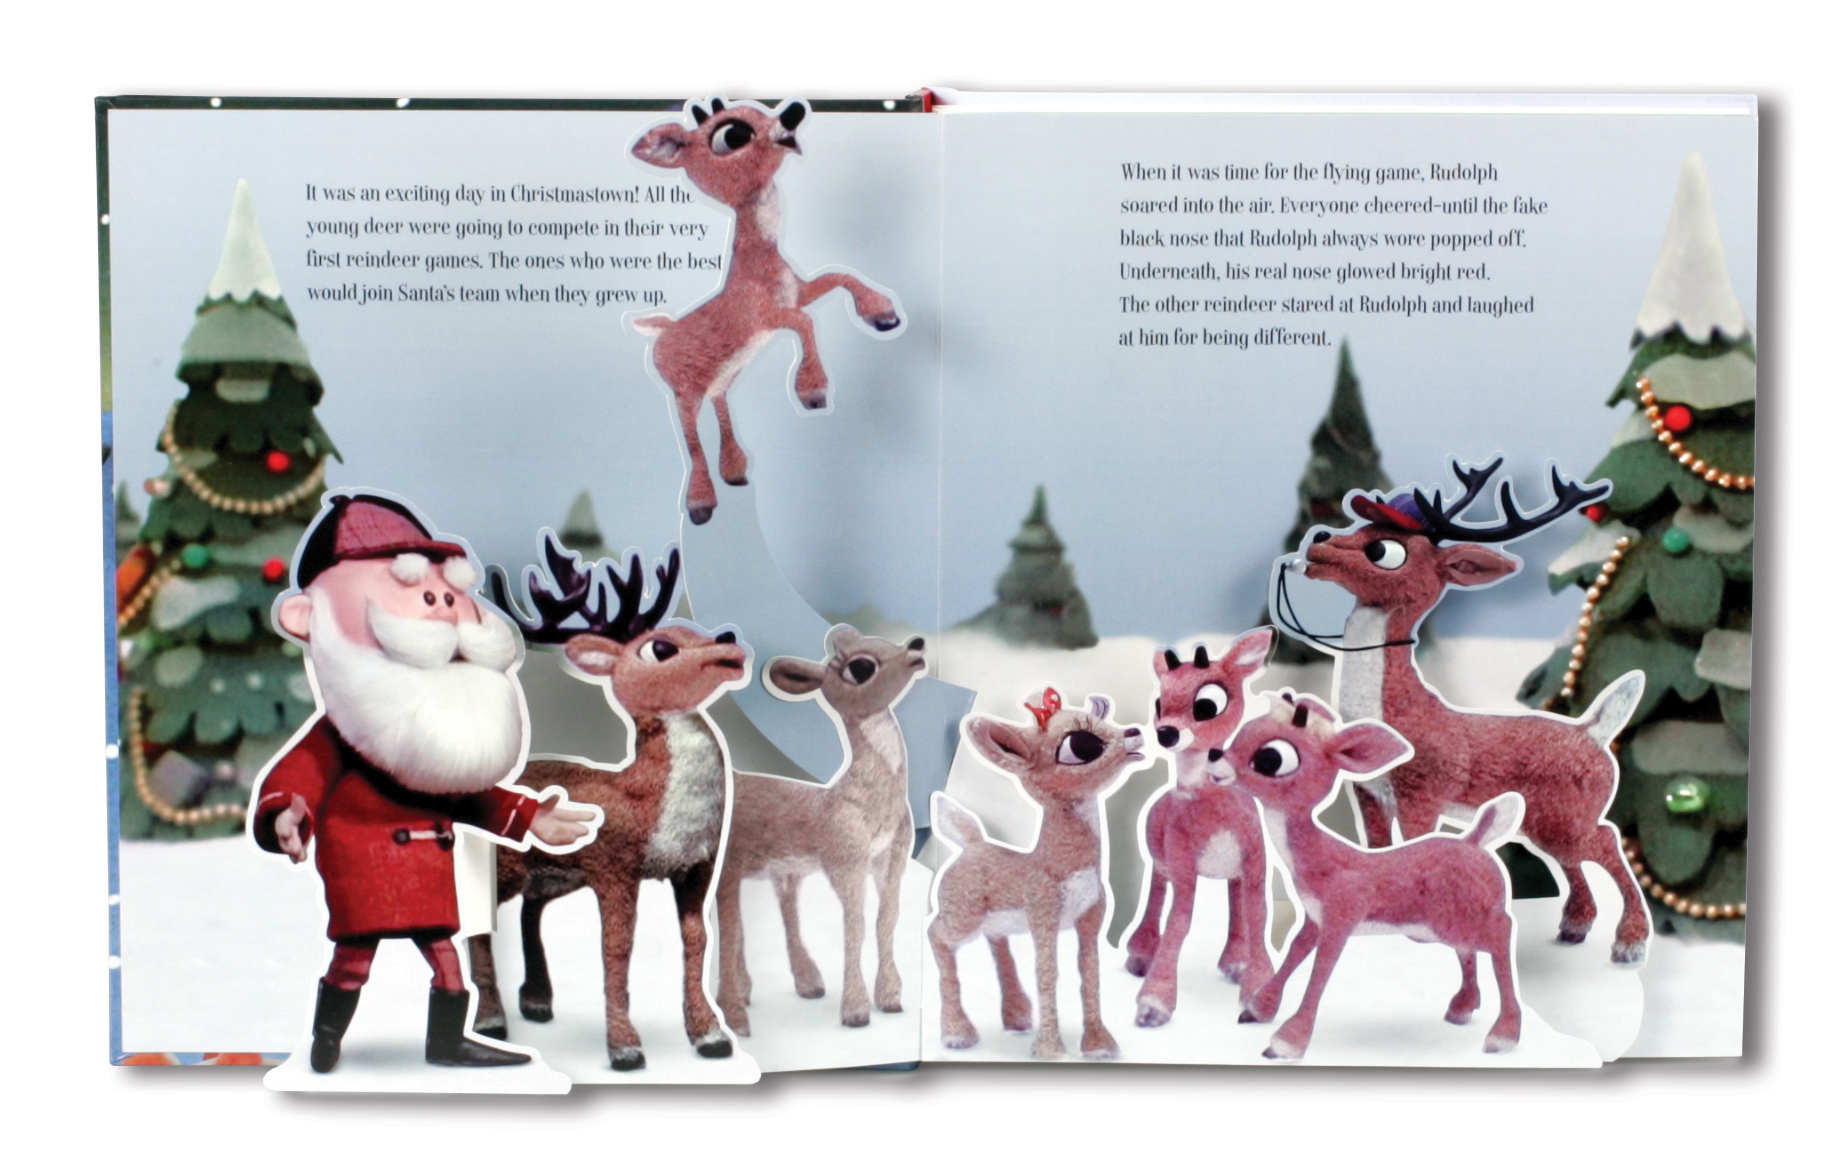 Rudolph the Red-Nosed Reindeer Pop-Up : The Childrens Book Review